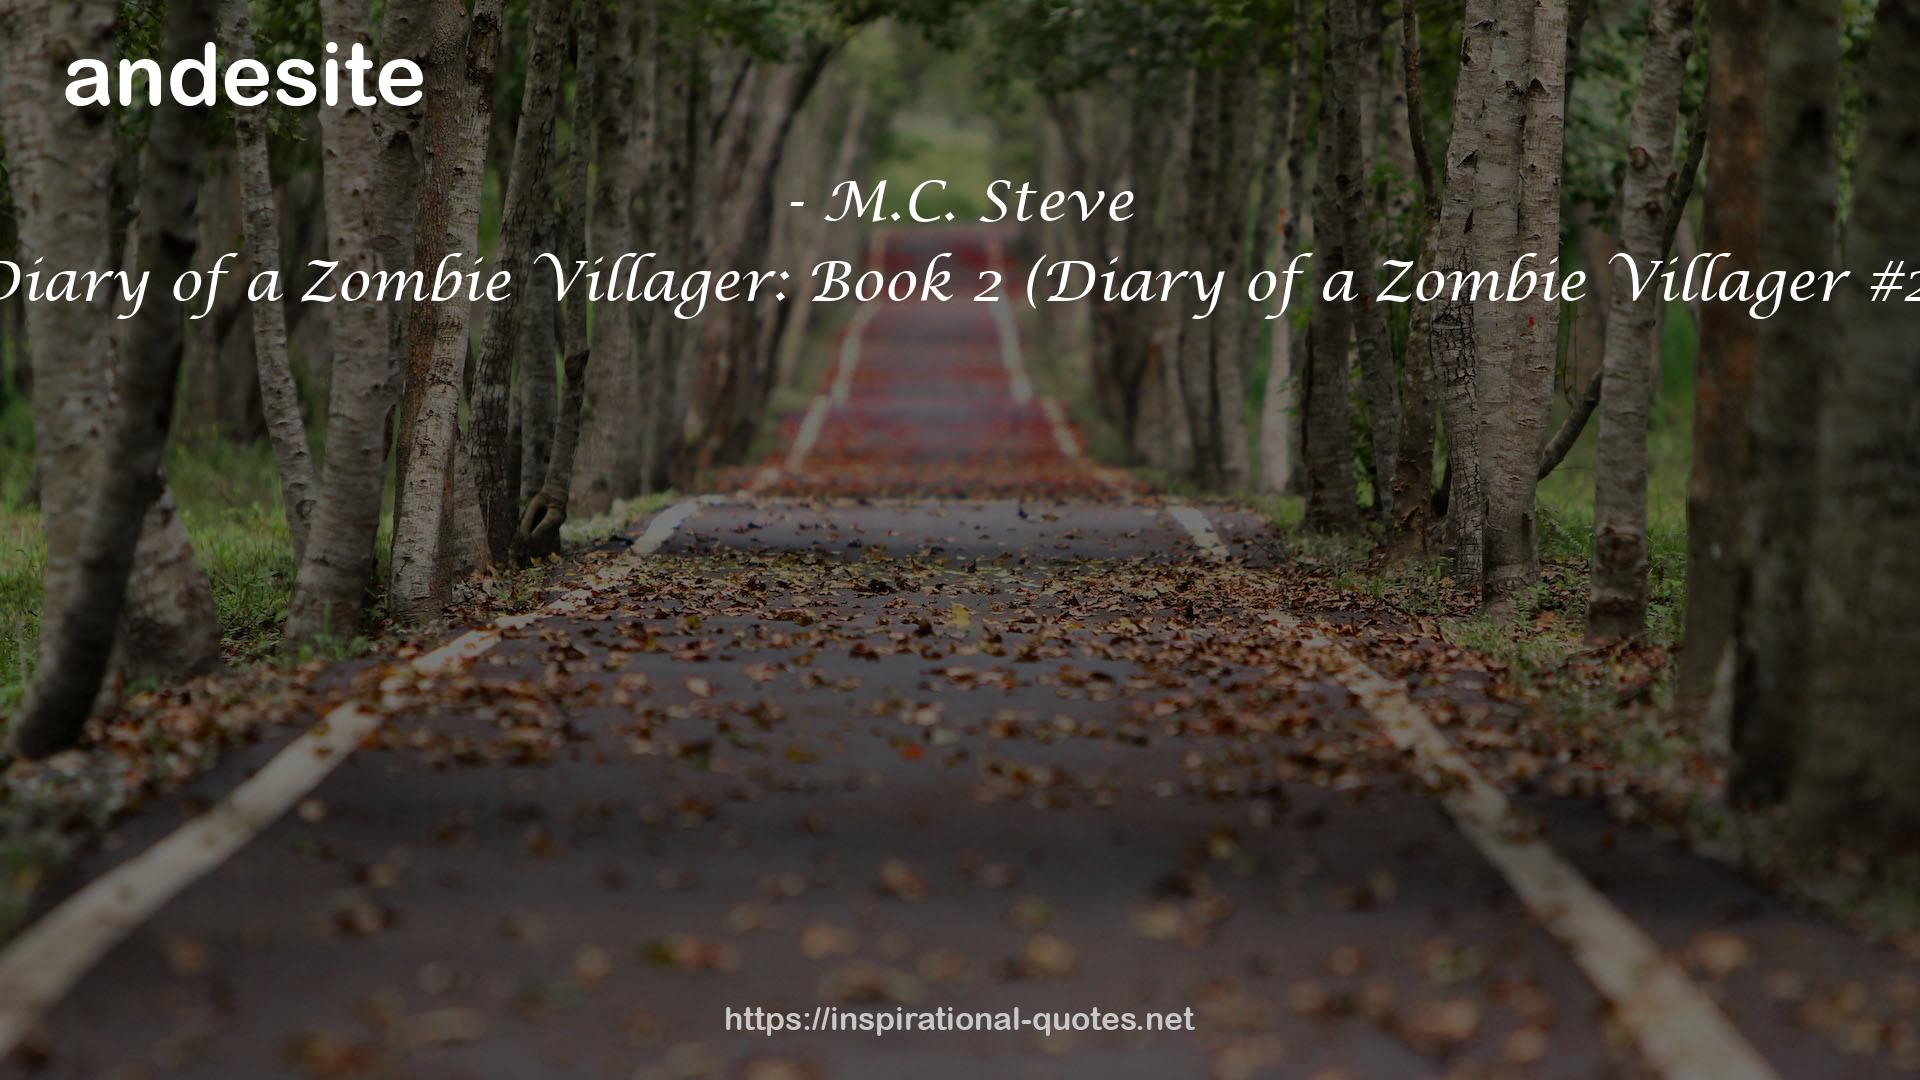 Diary of a Zombie Villager: Book 2 (Diary of a Zombie Villager #2) QUOTES